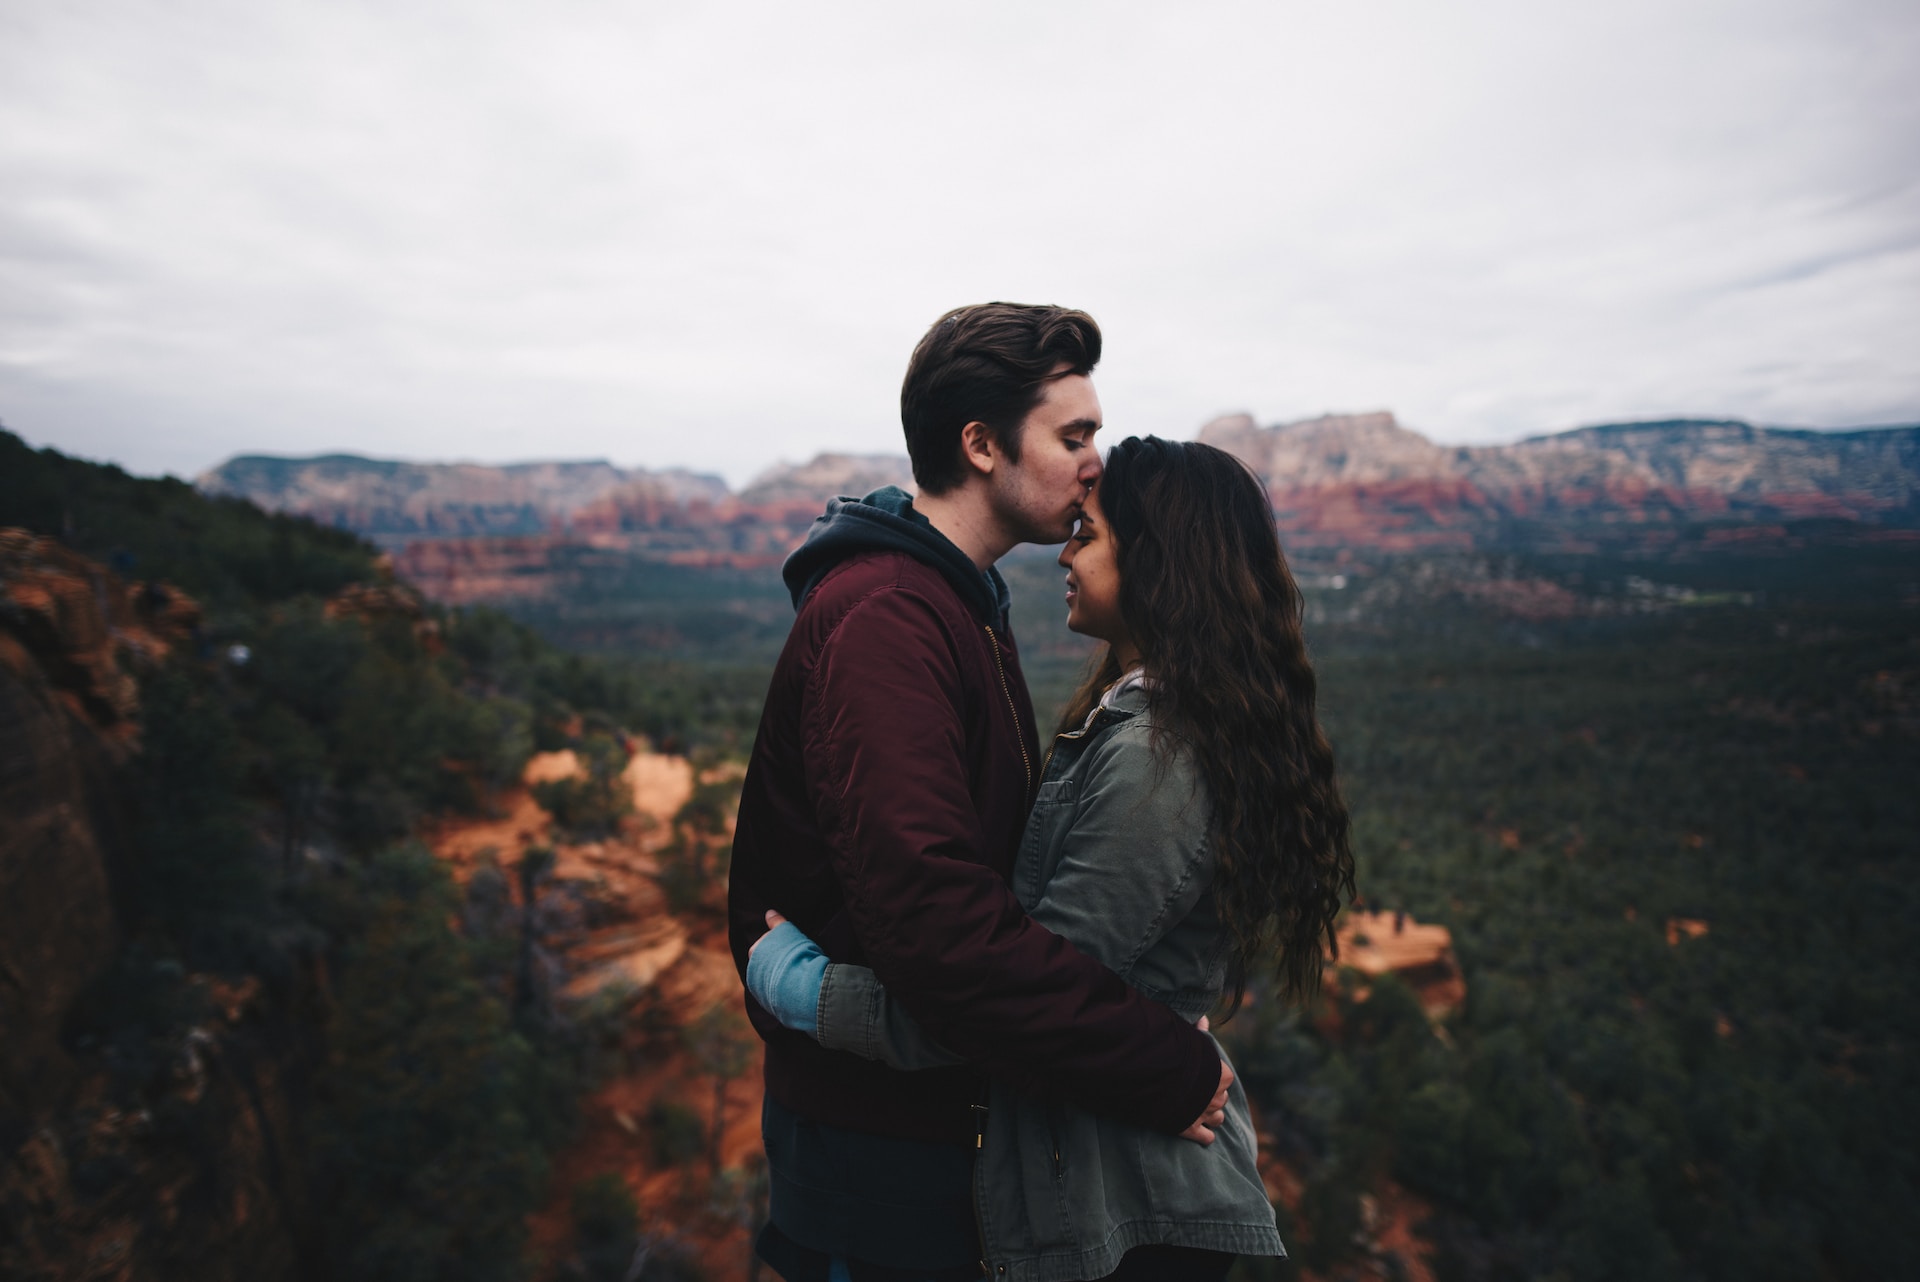 Couple, Love Images, Sedona, United States, Together, Friend, Brunette, Canyon, Human, Outdoors, Valley, Mountain Range, Leisure Activities, Hiking